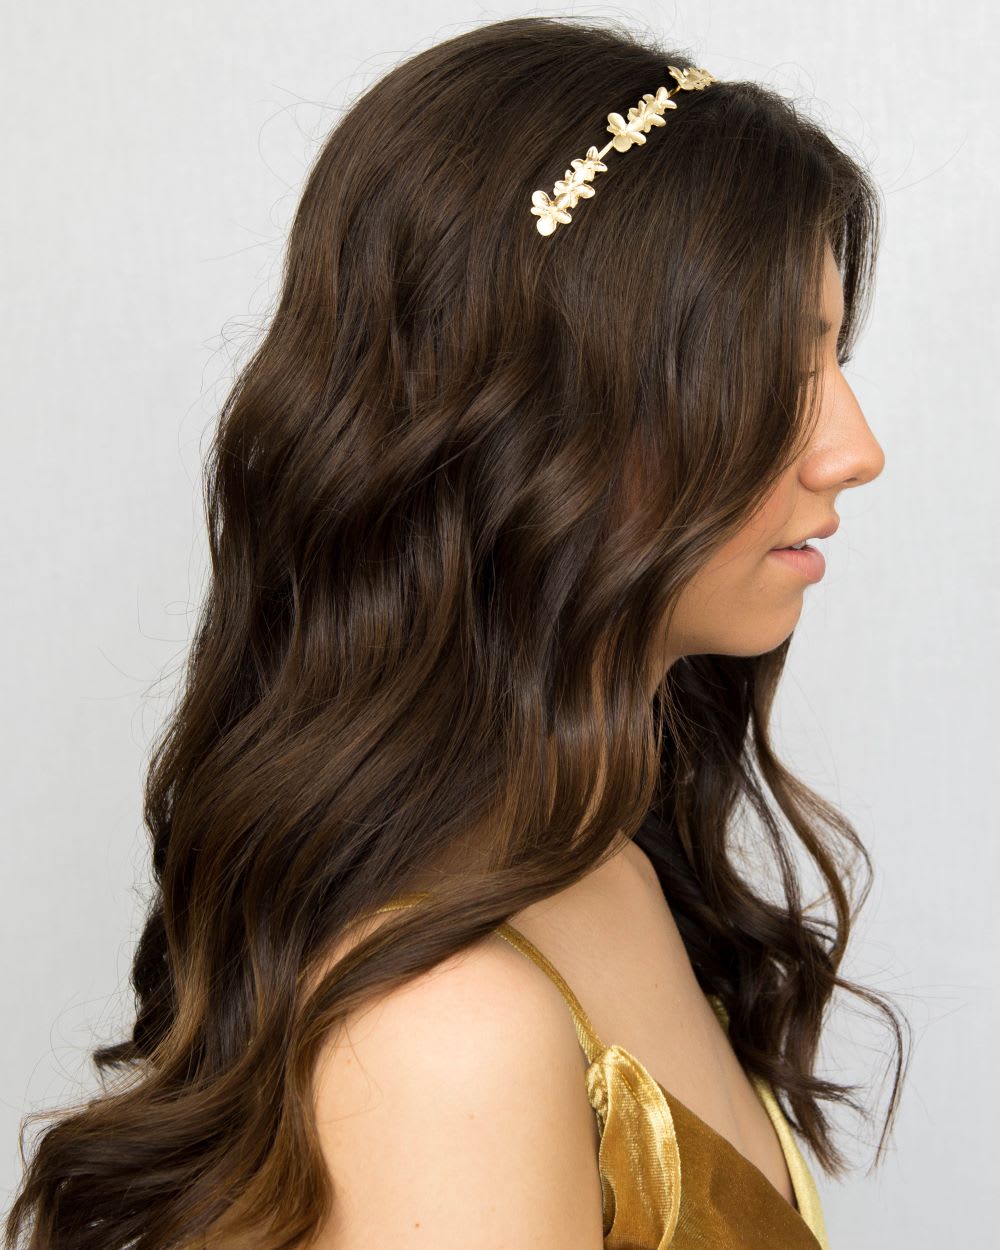 Headband Hairstyle With Romantic Waves: Holiday Hair Tutorial   Fashion Blog